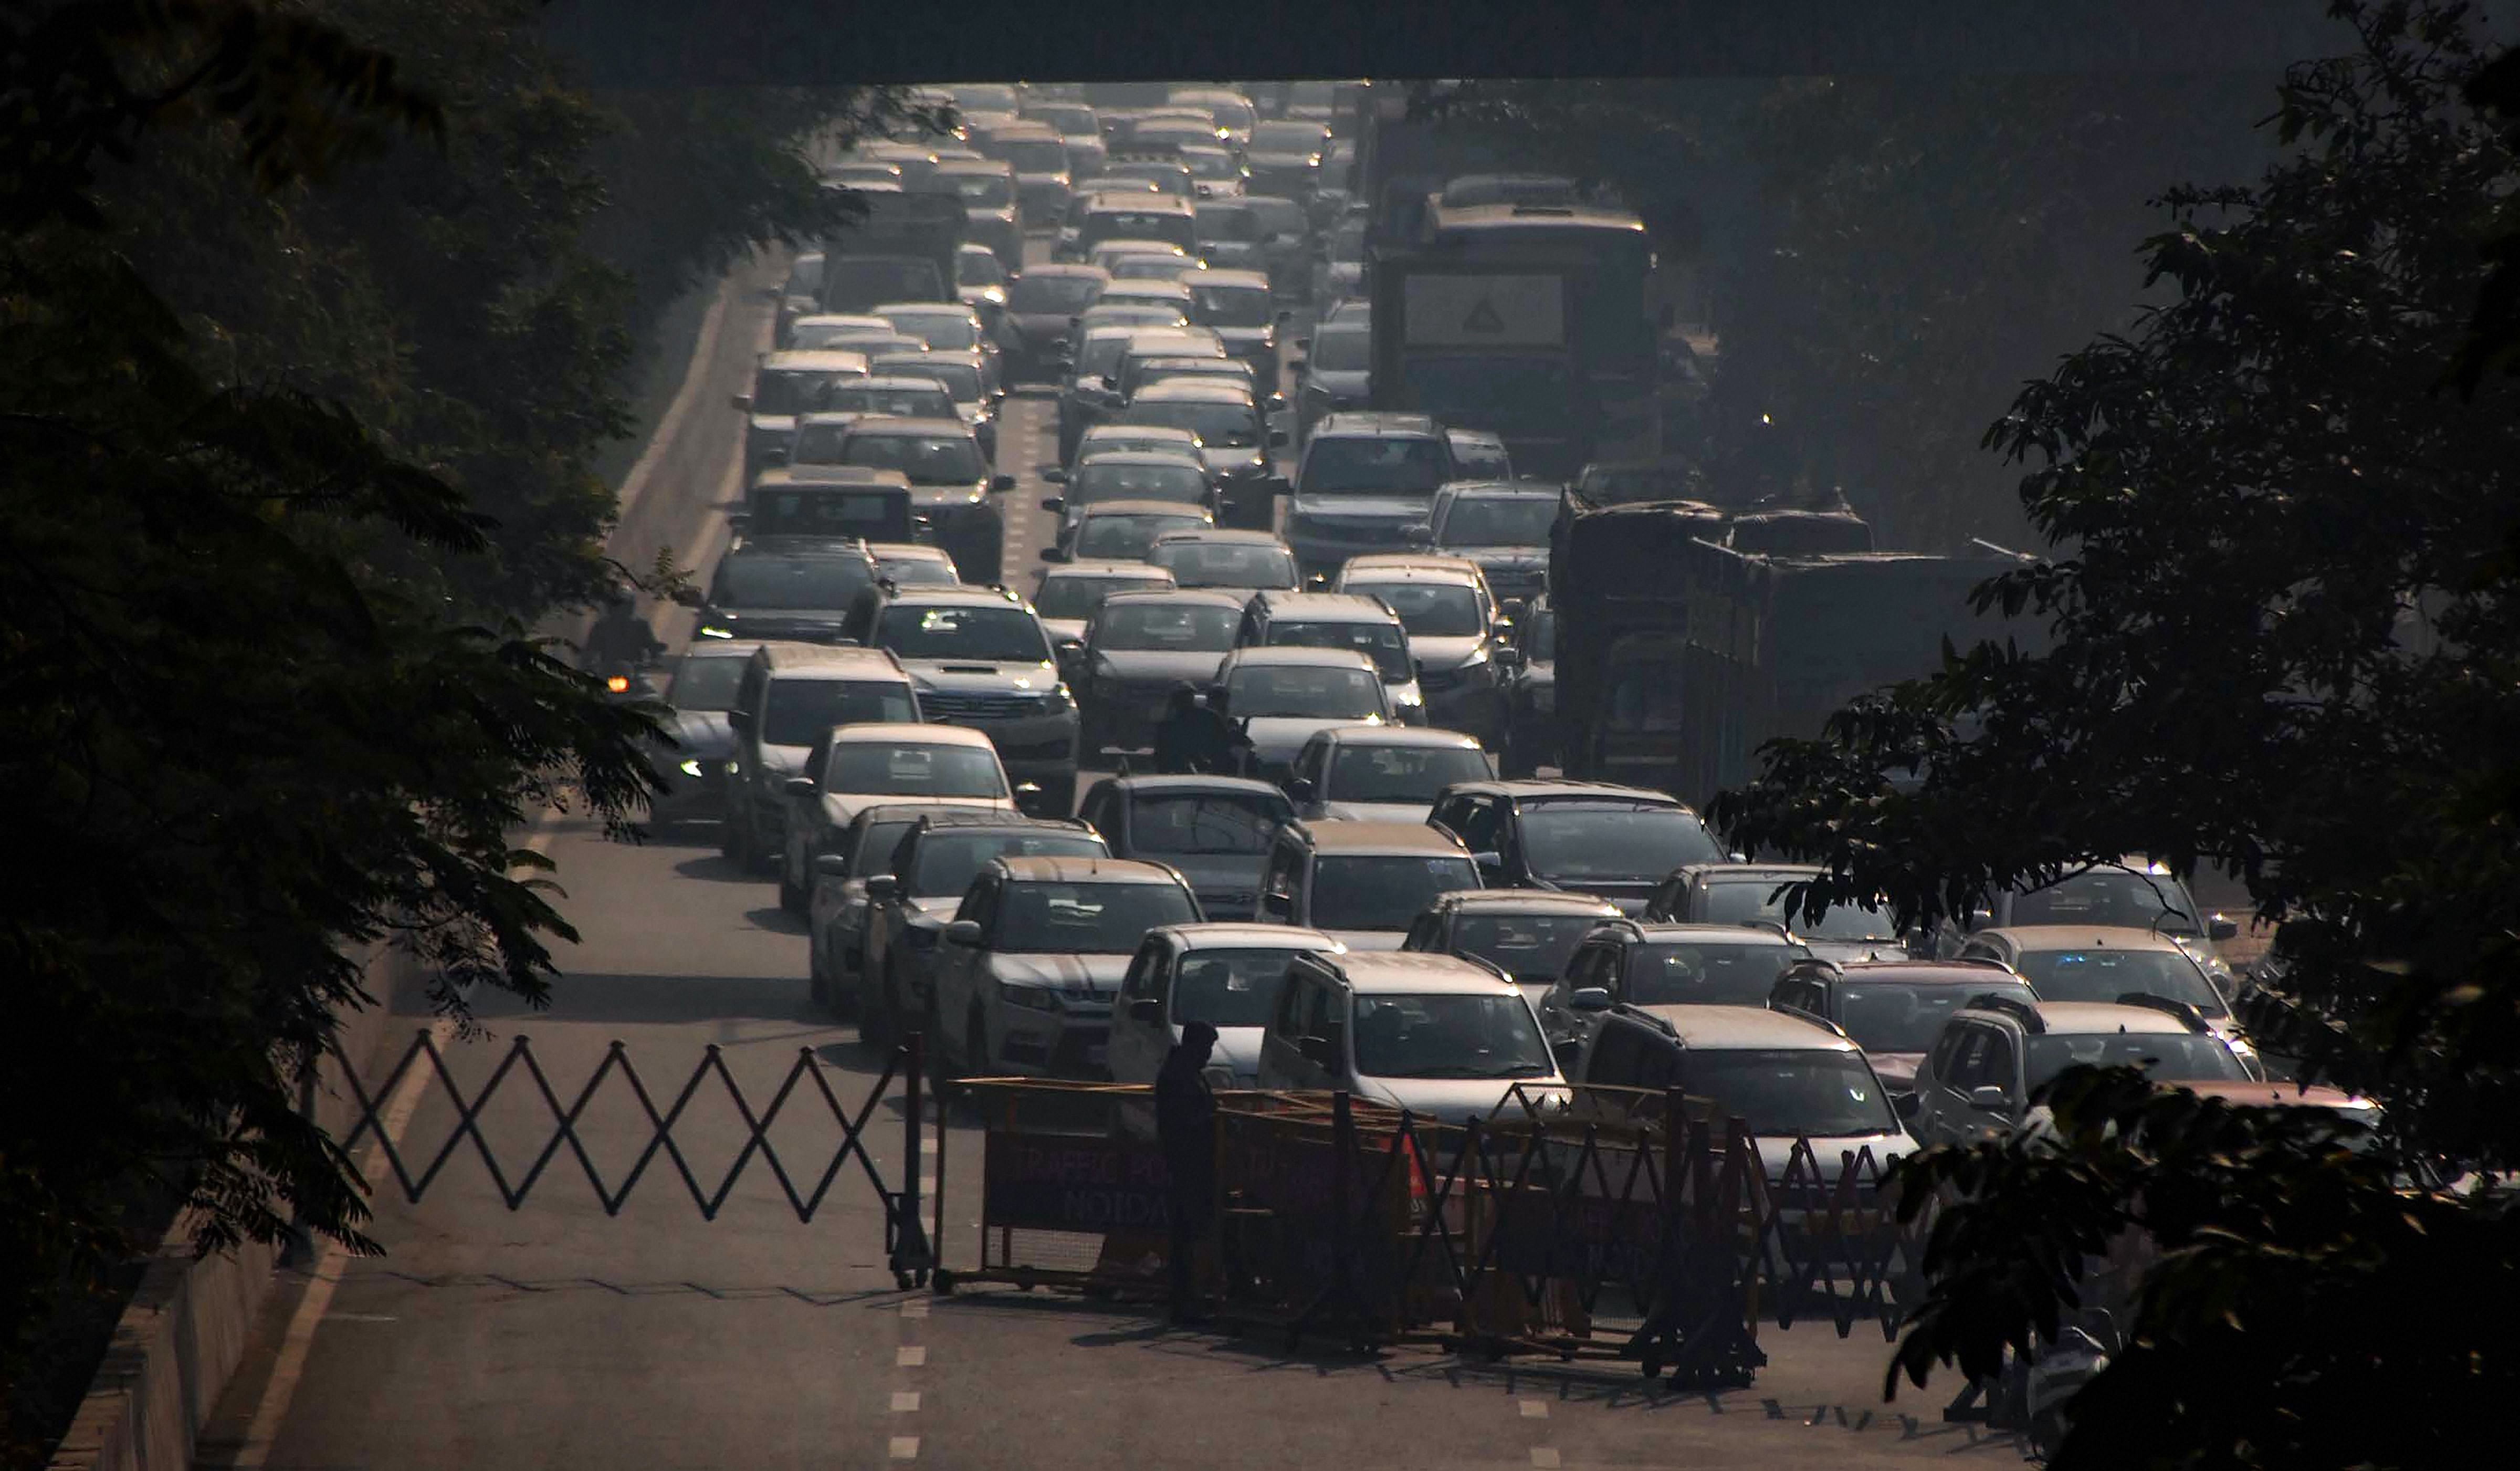  Vehicles stuck in a traffic jam due to farmers protest, at Noida-Delhi border, Thursday, Dec. 24, 2020. Credit: PTI Photo